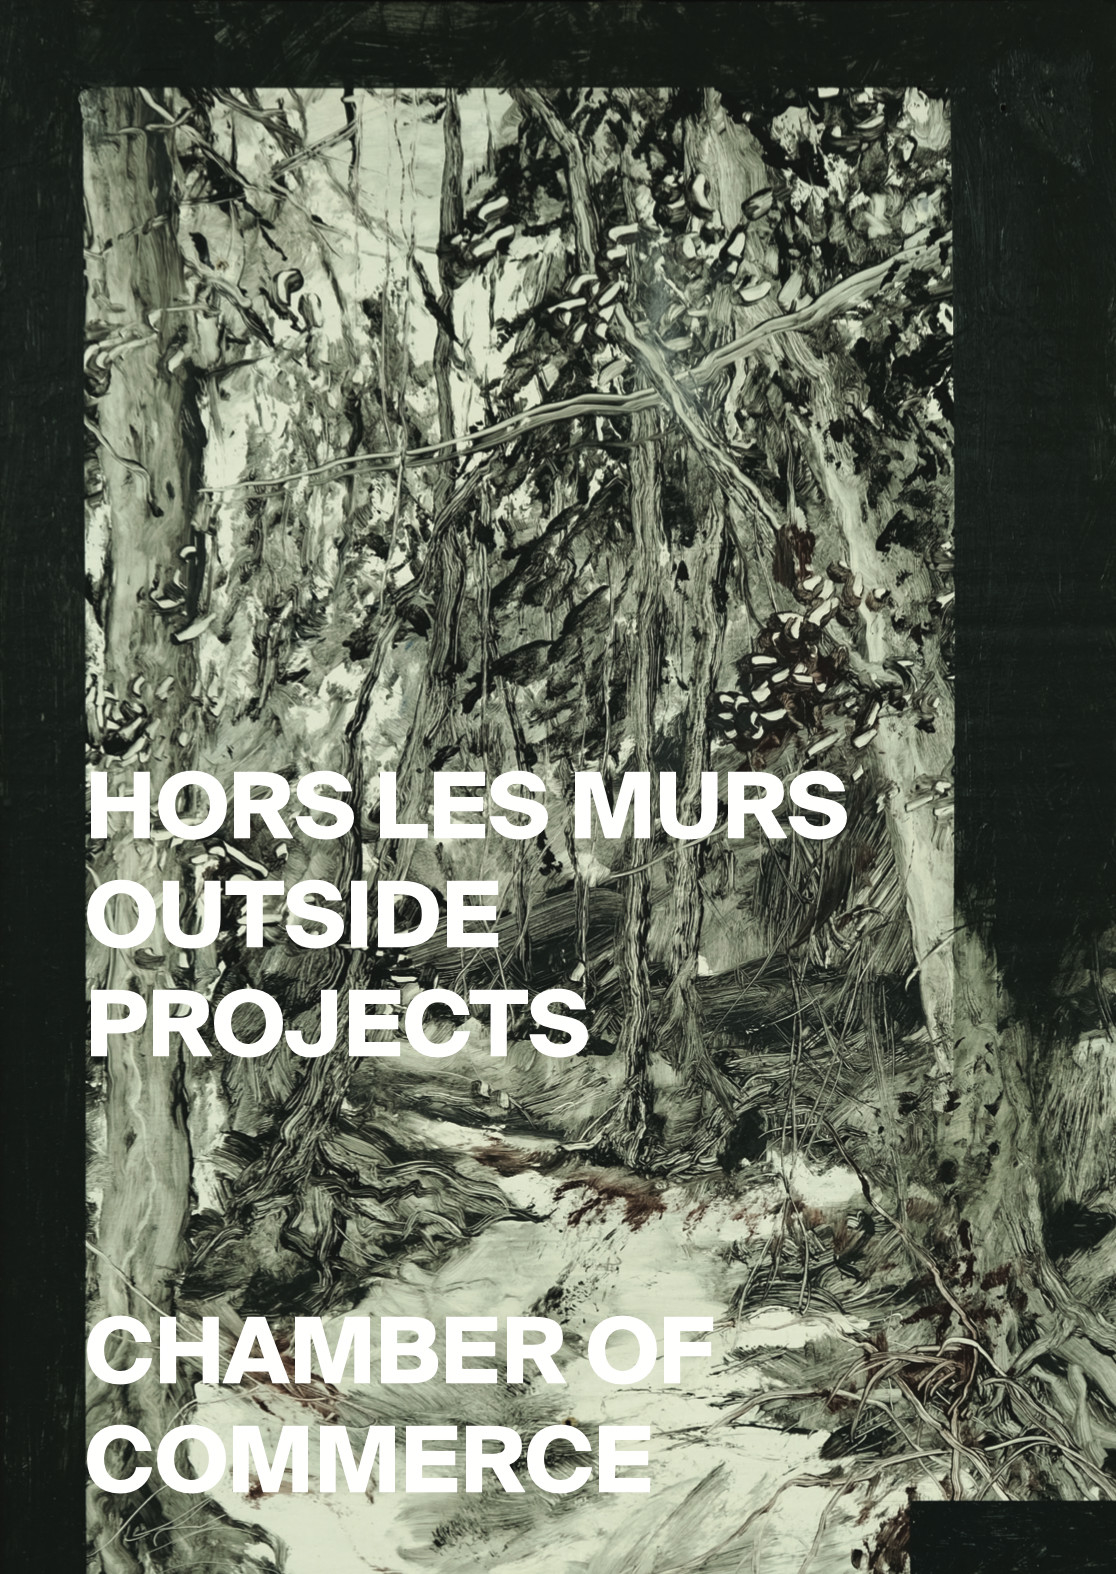 Exhibition Hors les murs | outside projects | Arny Schmit  Inside-Out  at Reuter Bausch Art Gallery